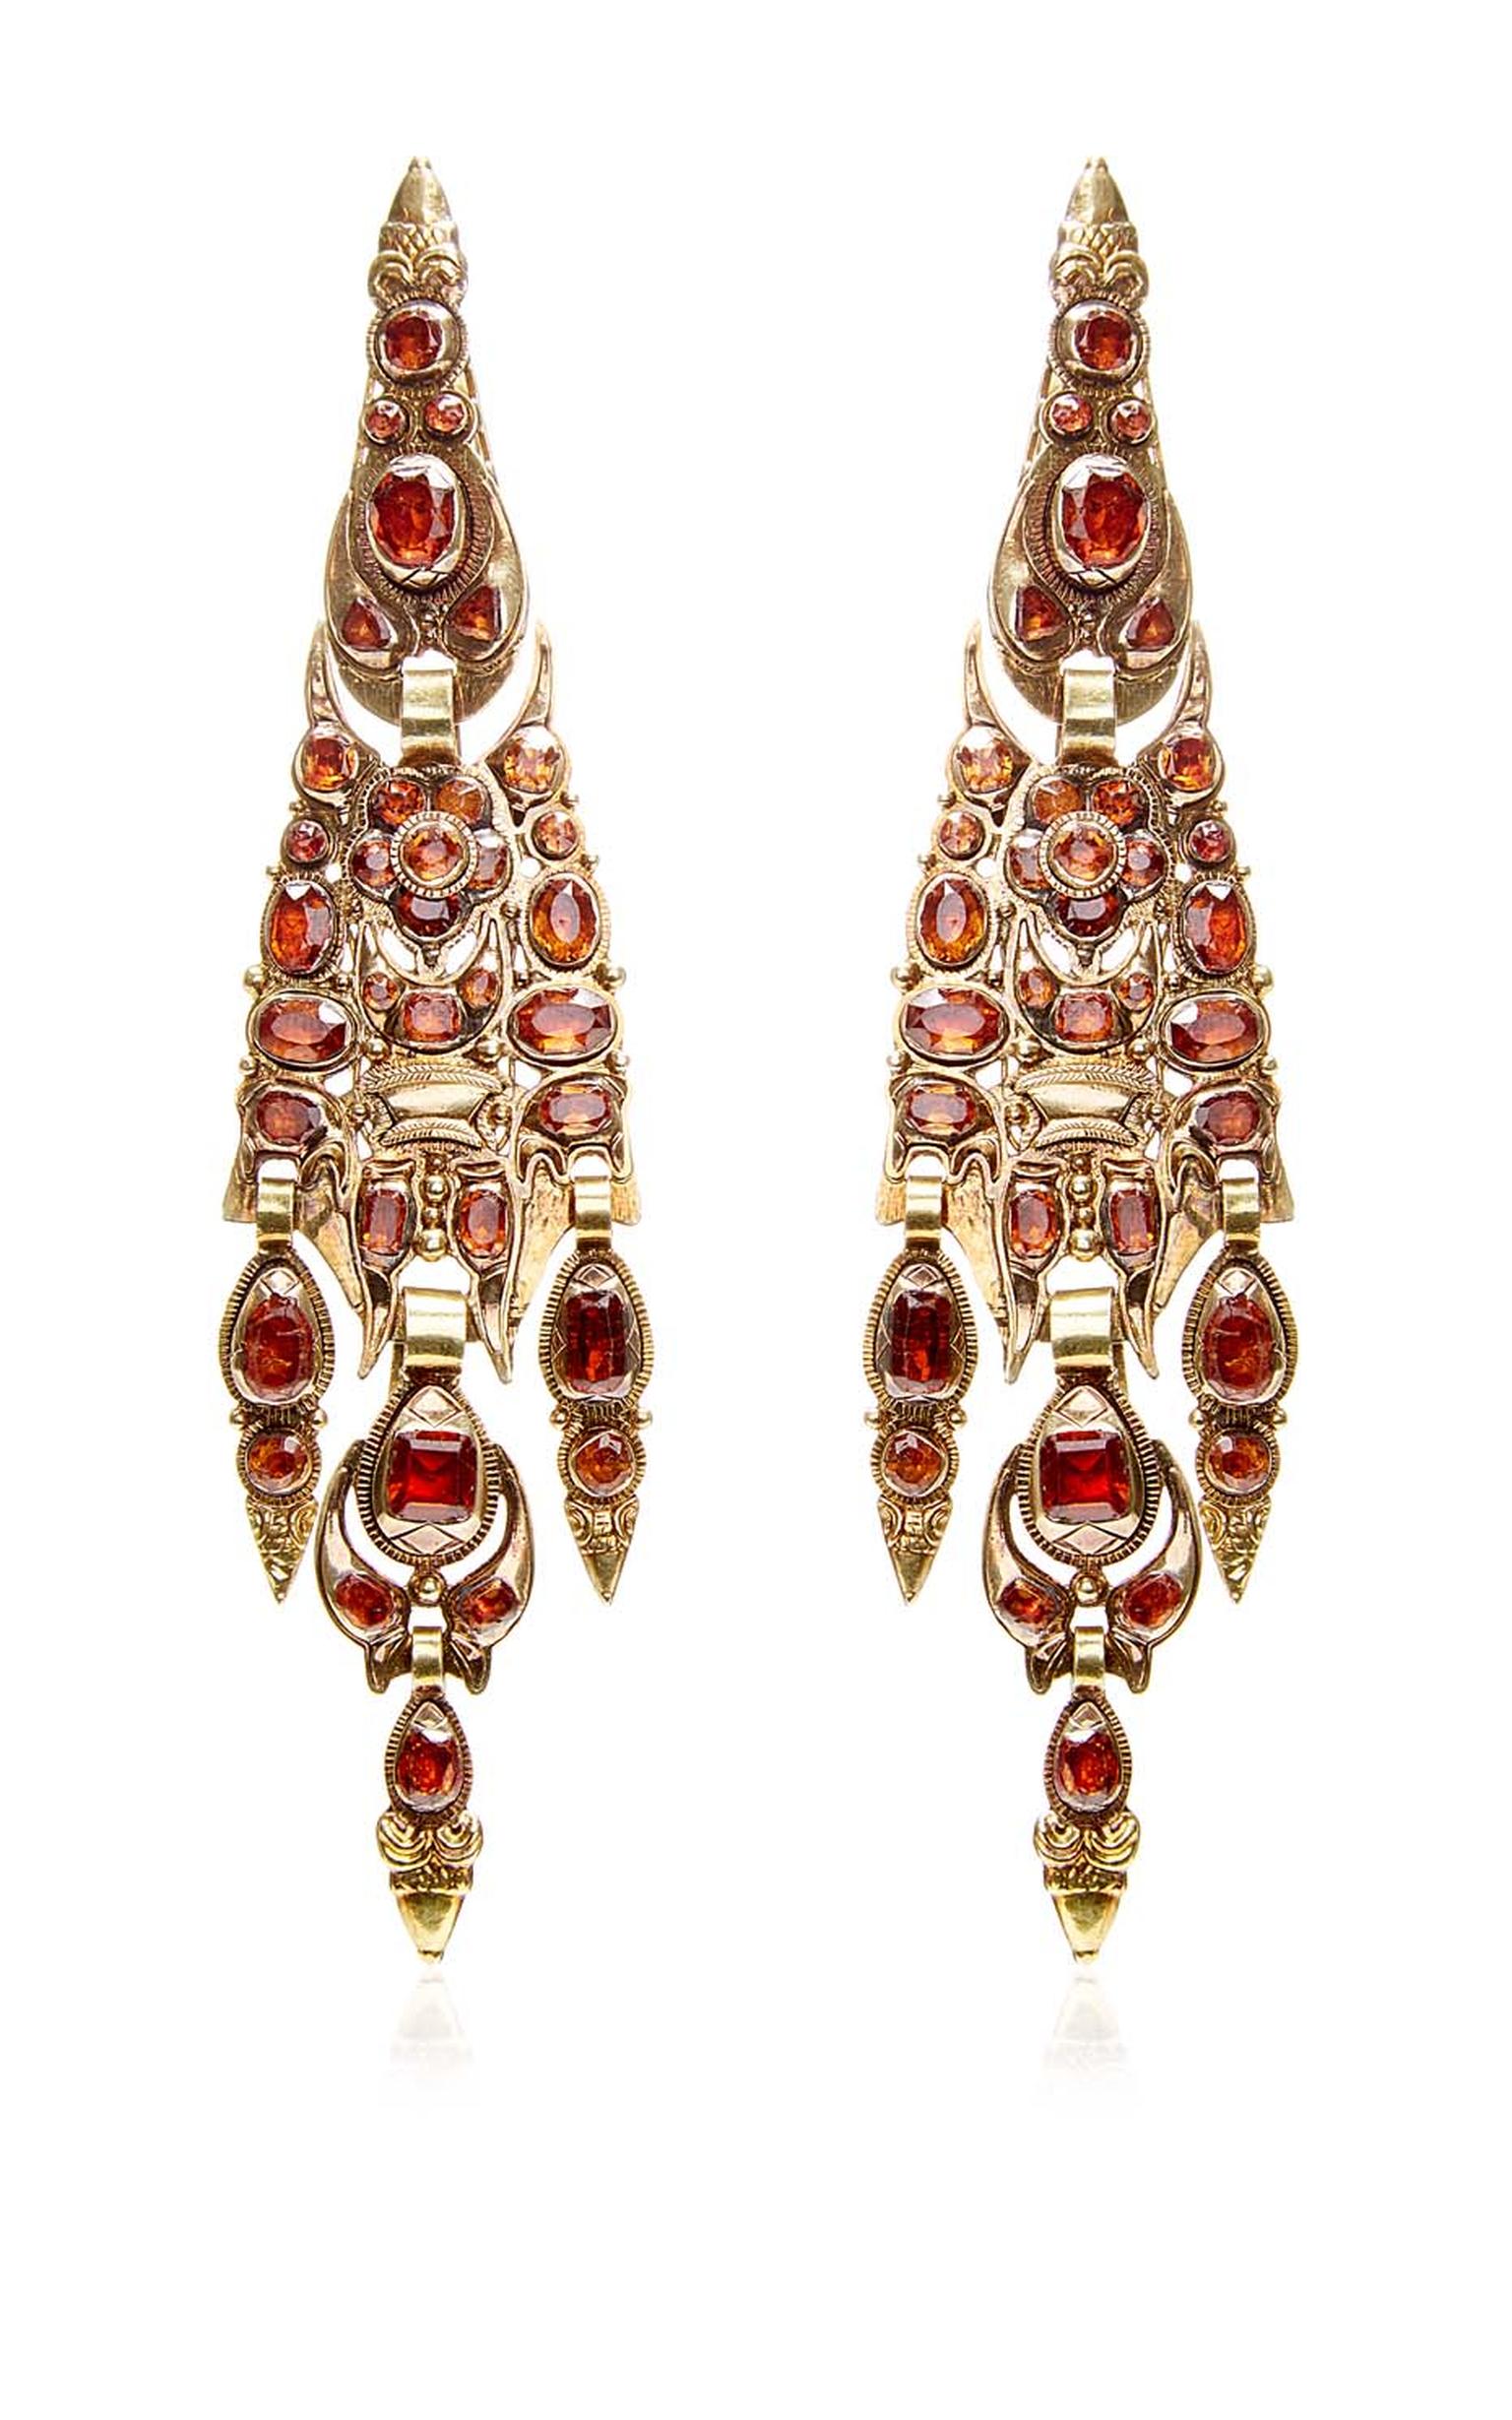 Catalan garnet earrings with a floral motif that date from the late 19th century. Available at Moda Operandi.